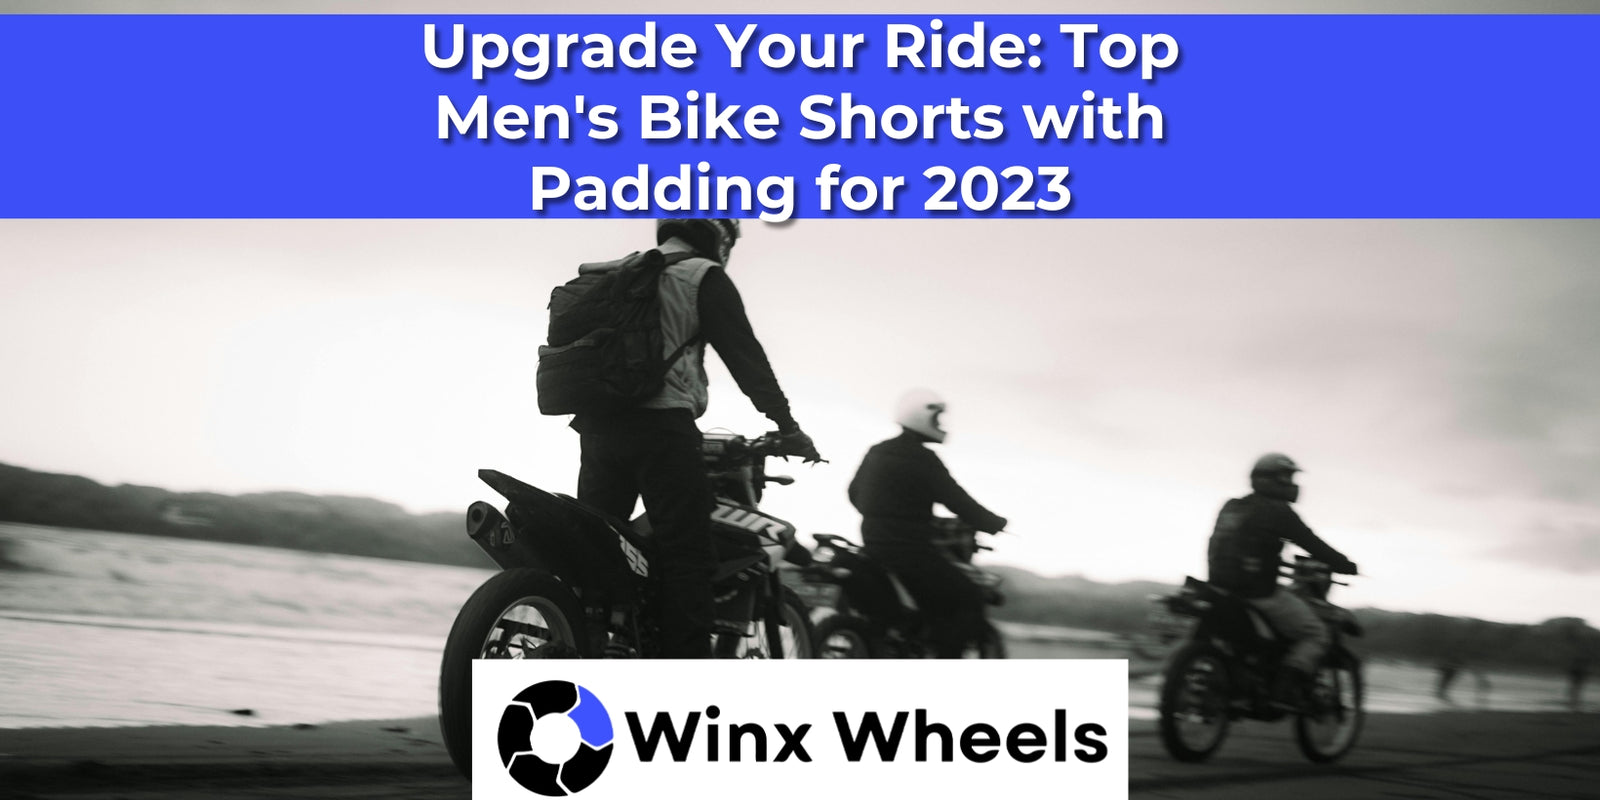 Upgrade Your Ride: Top Men's Bike Shorts with Padding for 2023